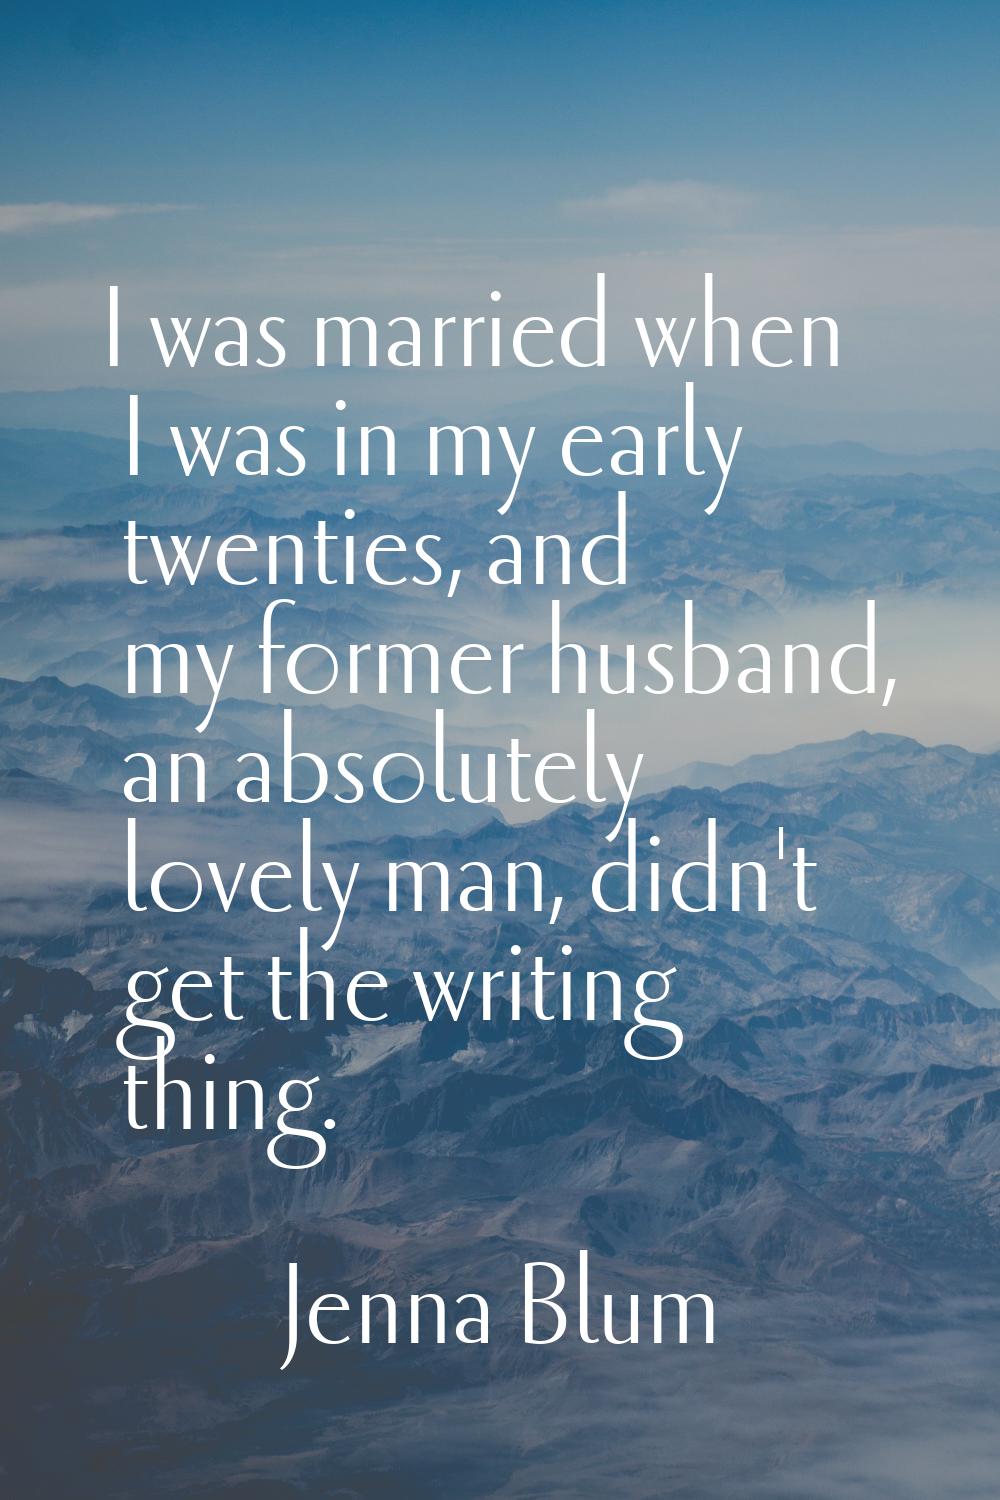 I was married when I was in my early twenties, and my former husband, an absolutely lovely man, did